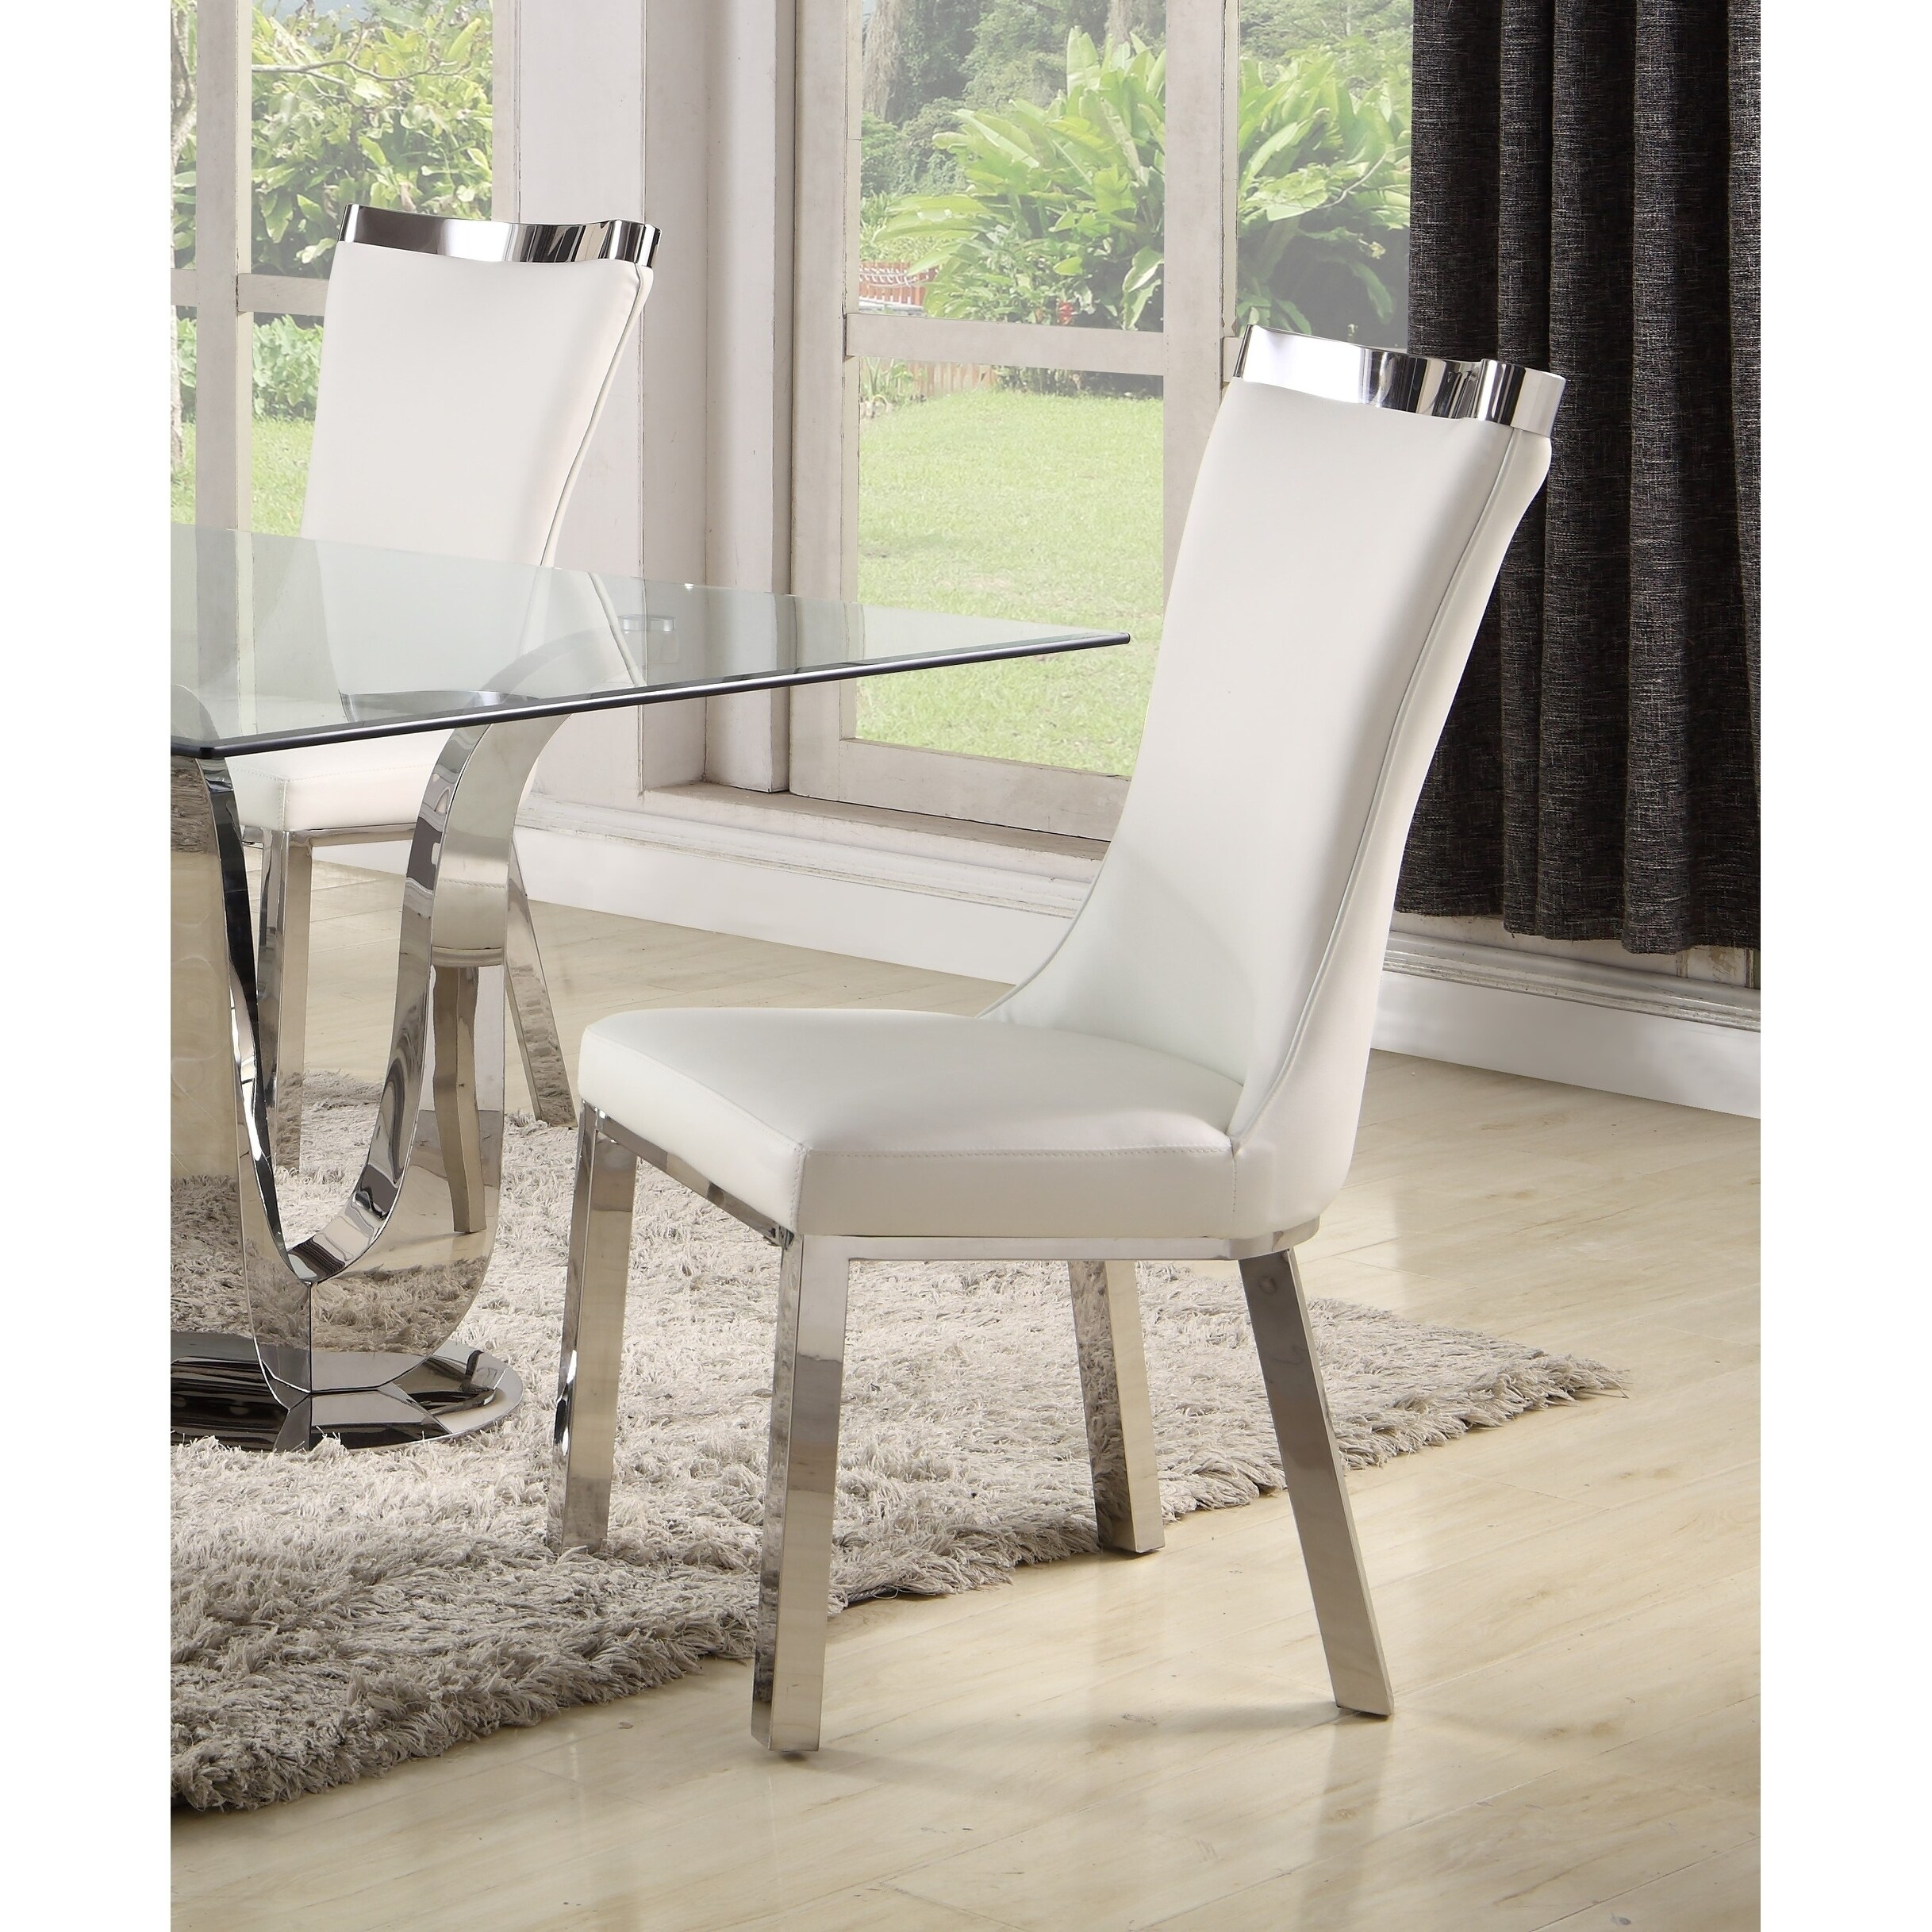 Somette Amelia Curved Back Dining Chair in White, Set of 2